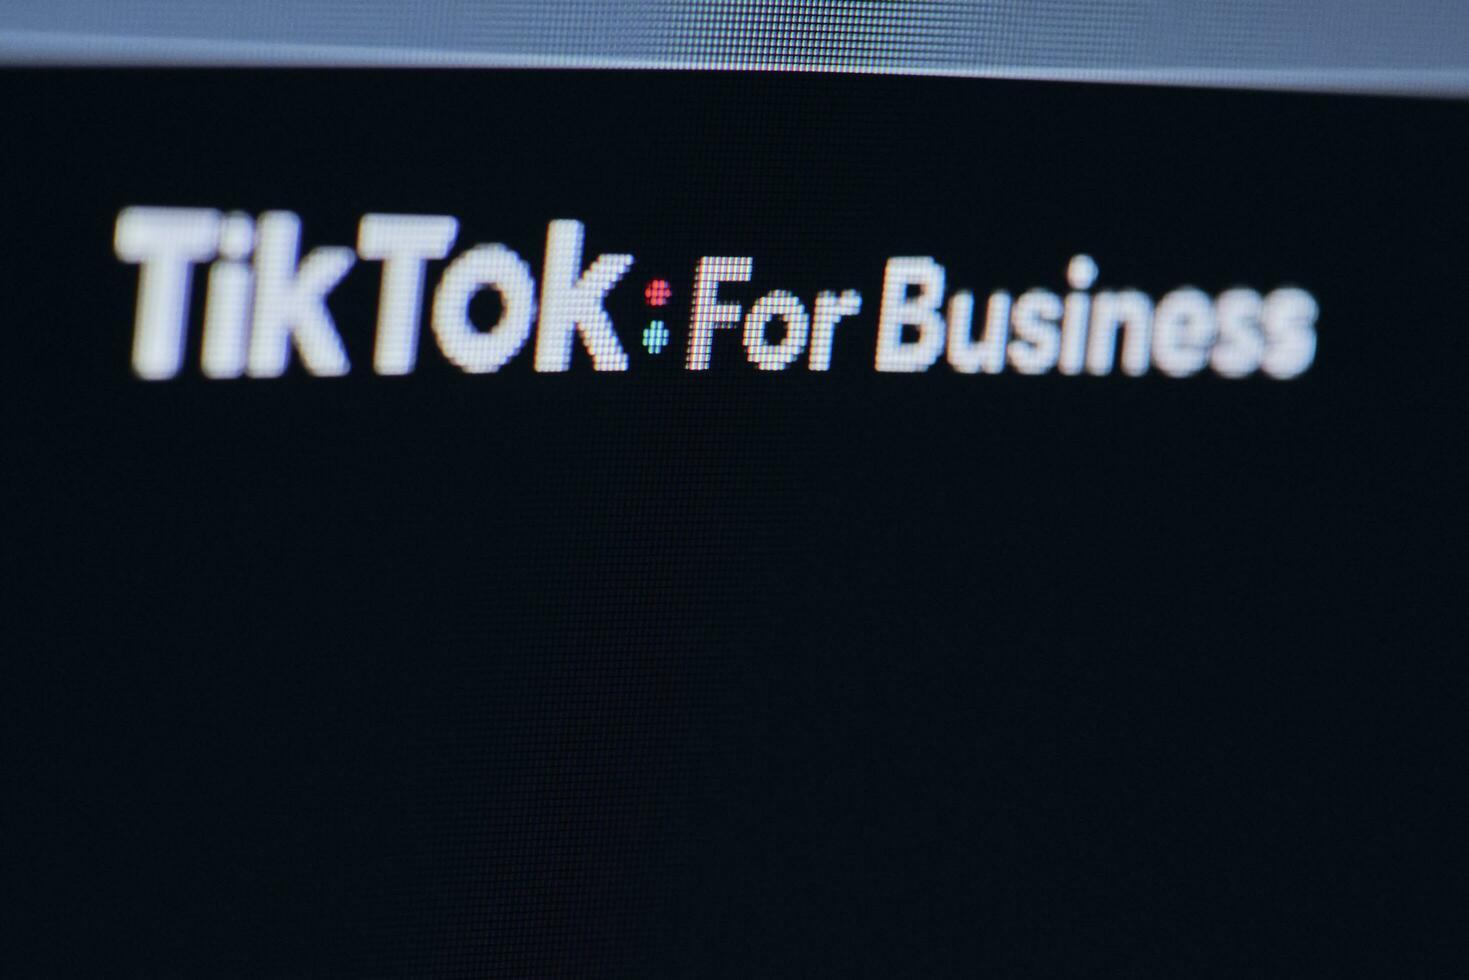 TikTok for business - web page captured from computer monitor photo